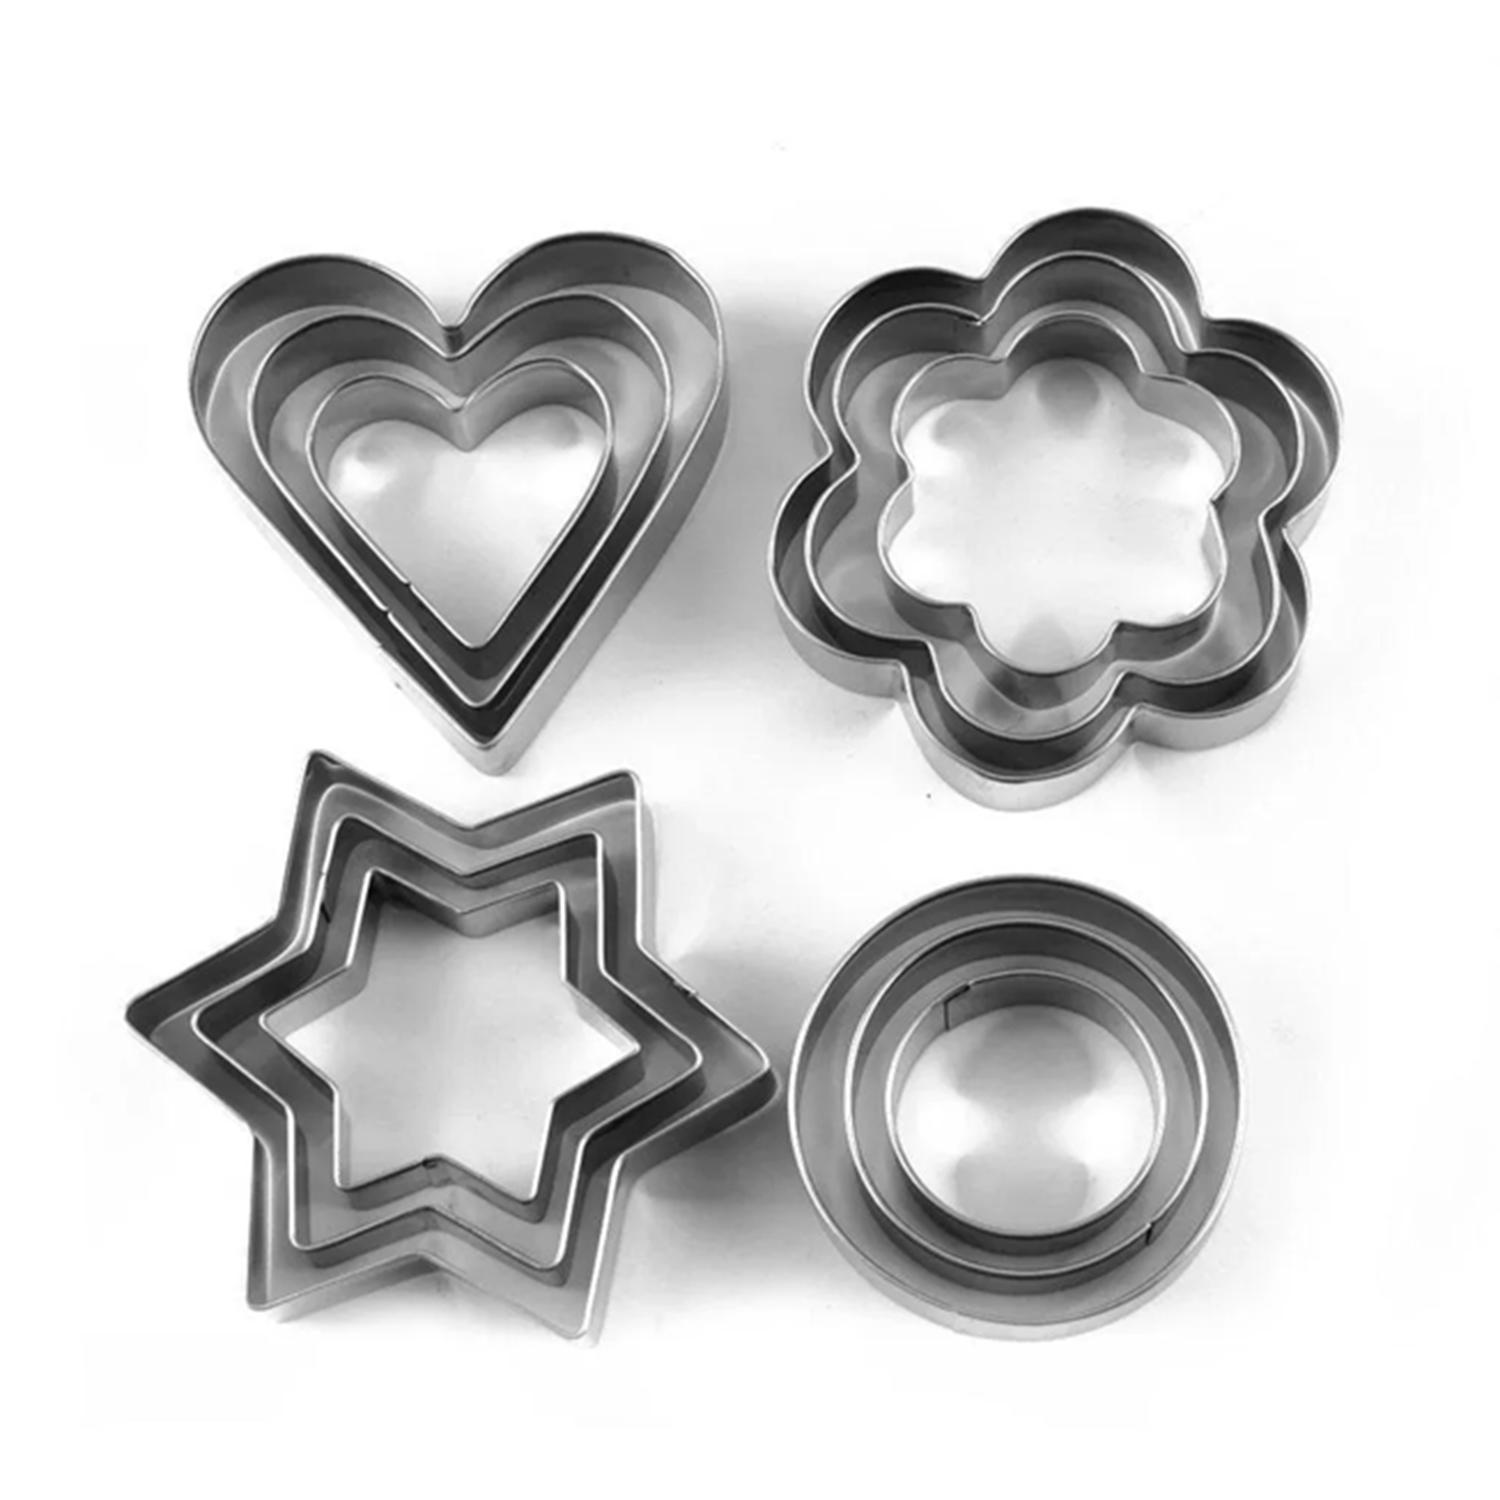 12 PCS COOKIE CUTTER SET ROUND, STAR, FLOWER AND HEART SHAPES